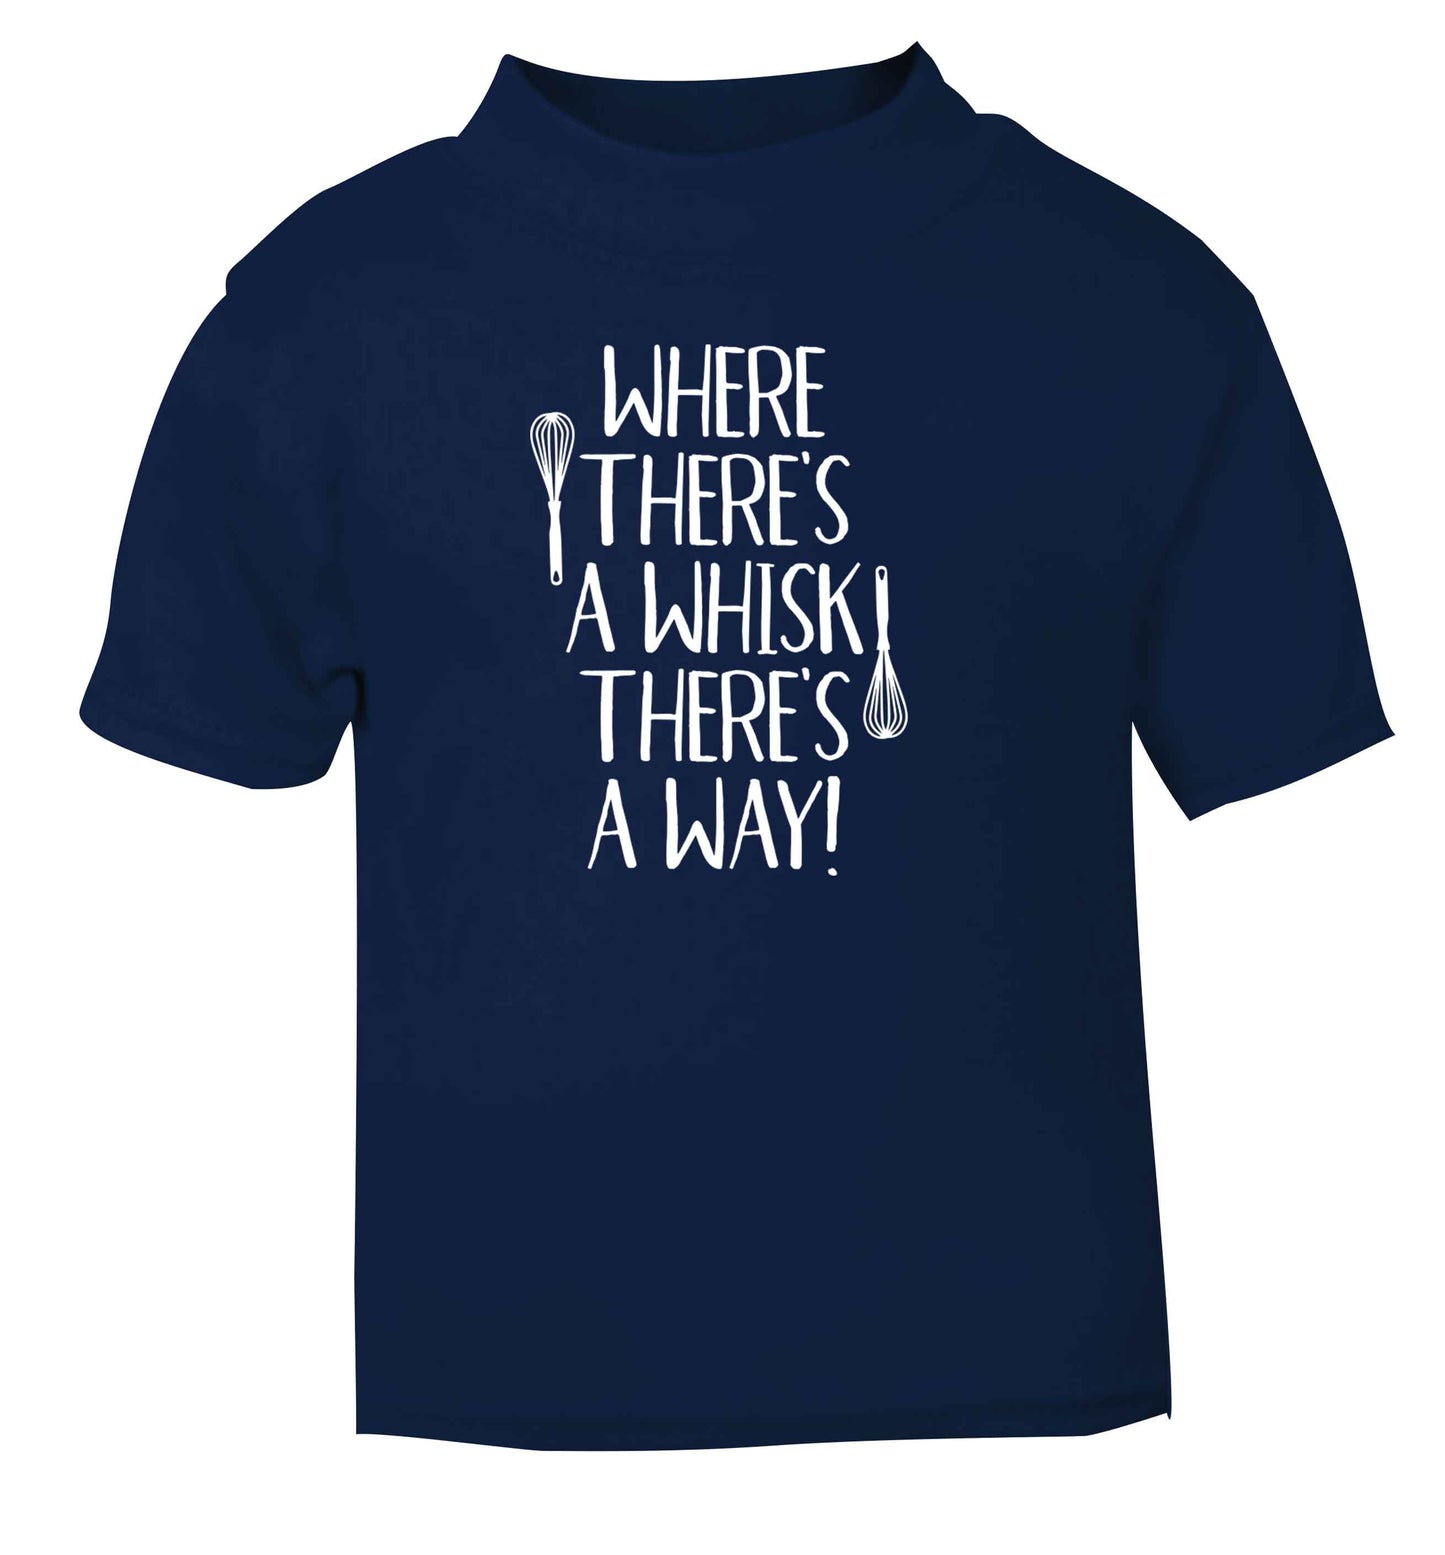 Where there's a whisk there's a way navy Baby Toddler Tshirt 2 Years